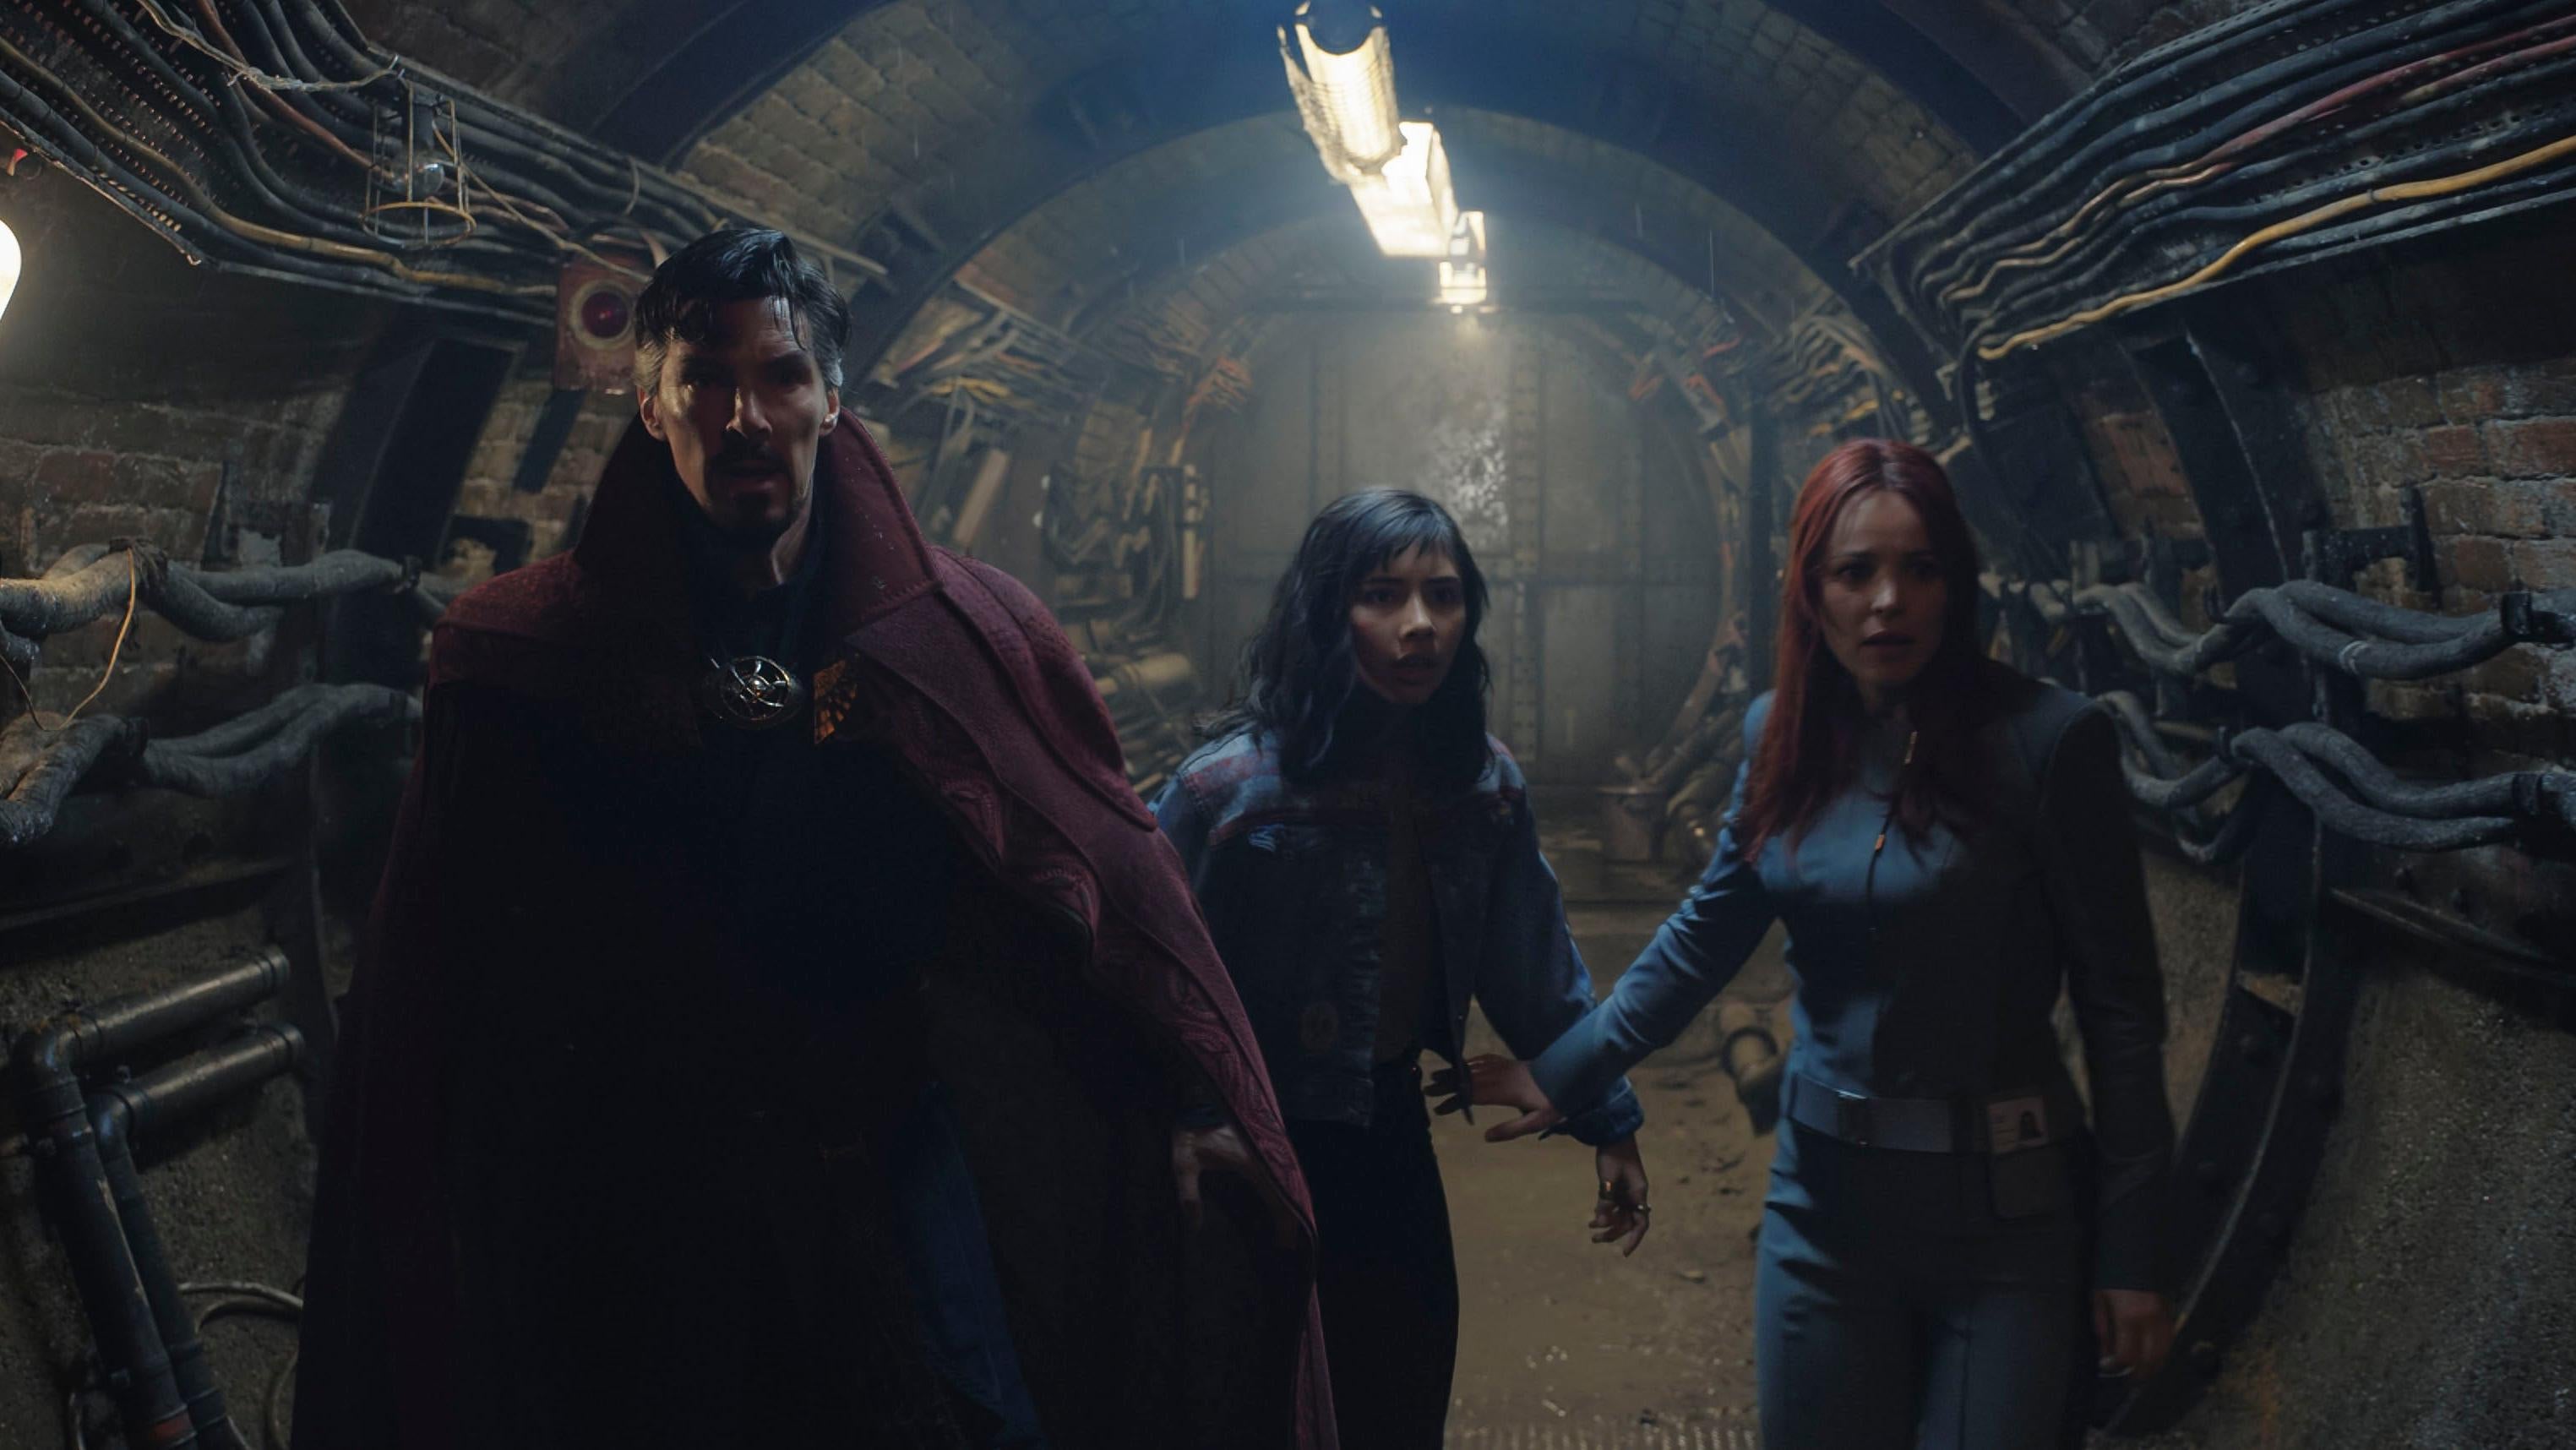 Our main trio in act two (Image: Marvel Studios)